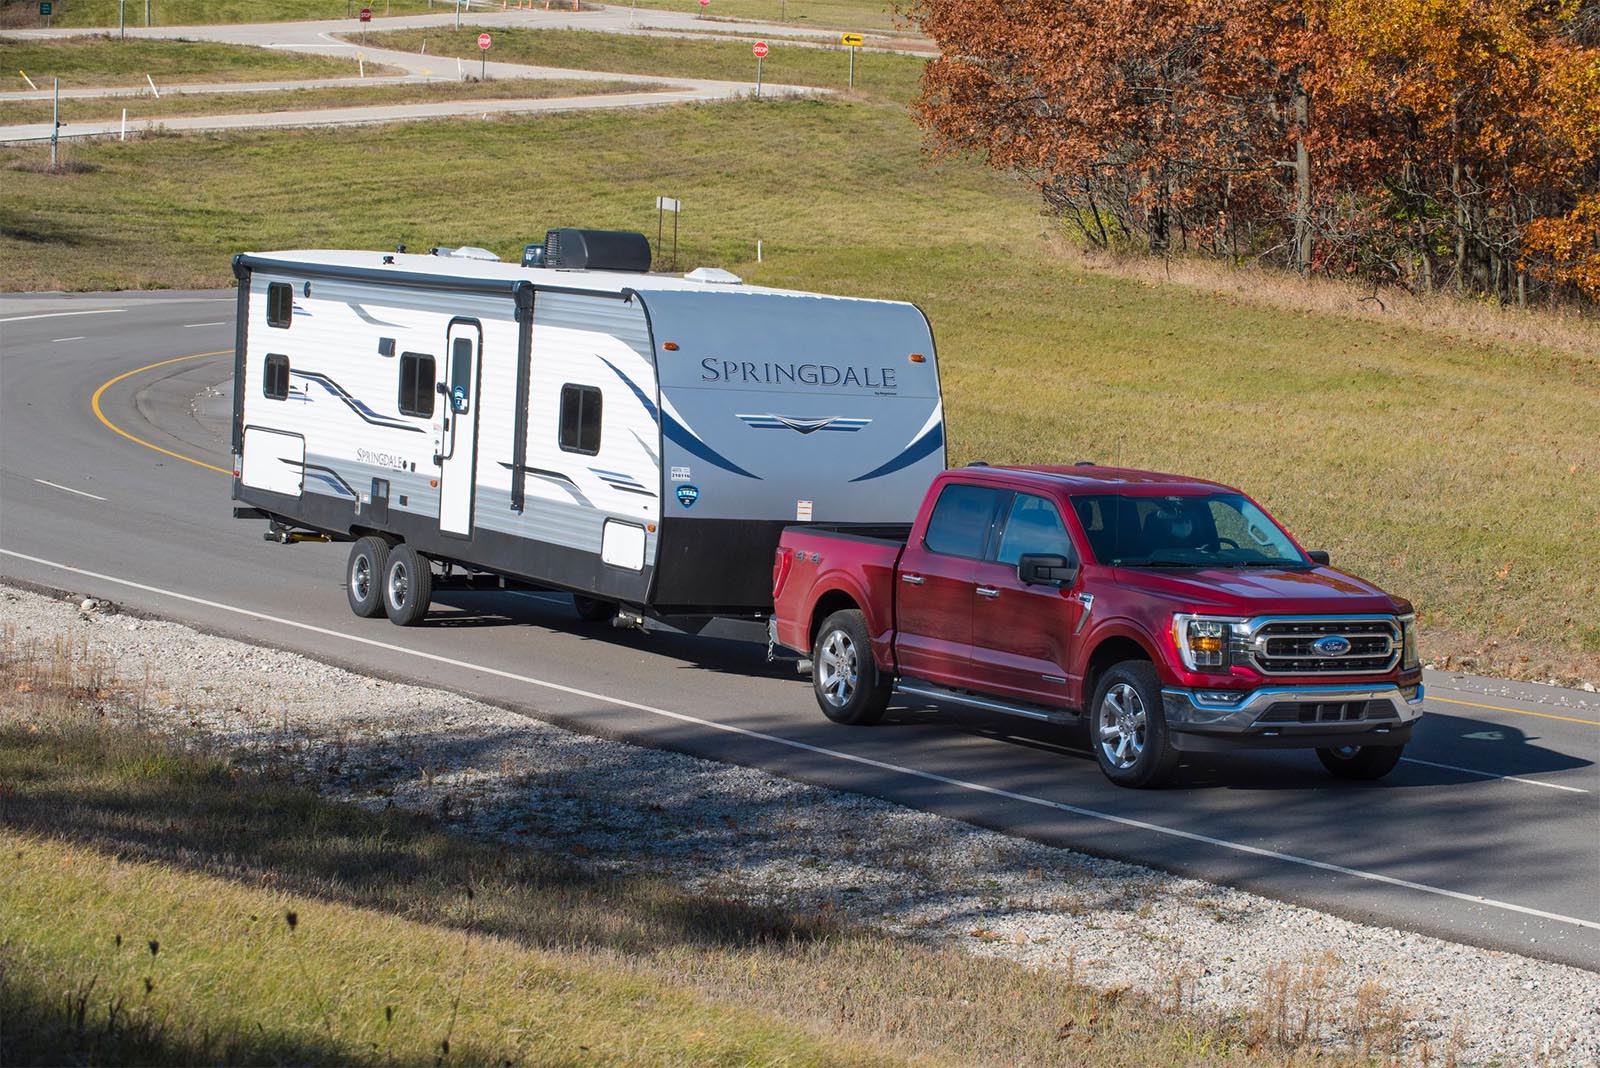 First Drive: 2021 Ford F-150 - The Detroit Bureau 2021 Ford F-150 3.5 Ecoboost Towing Capacity